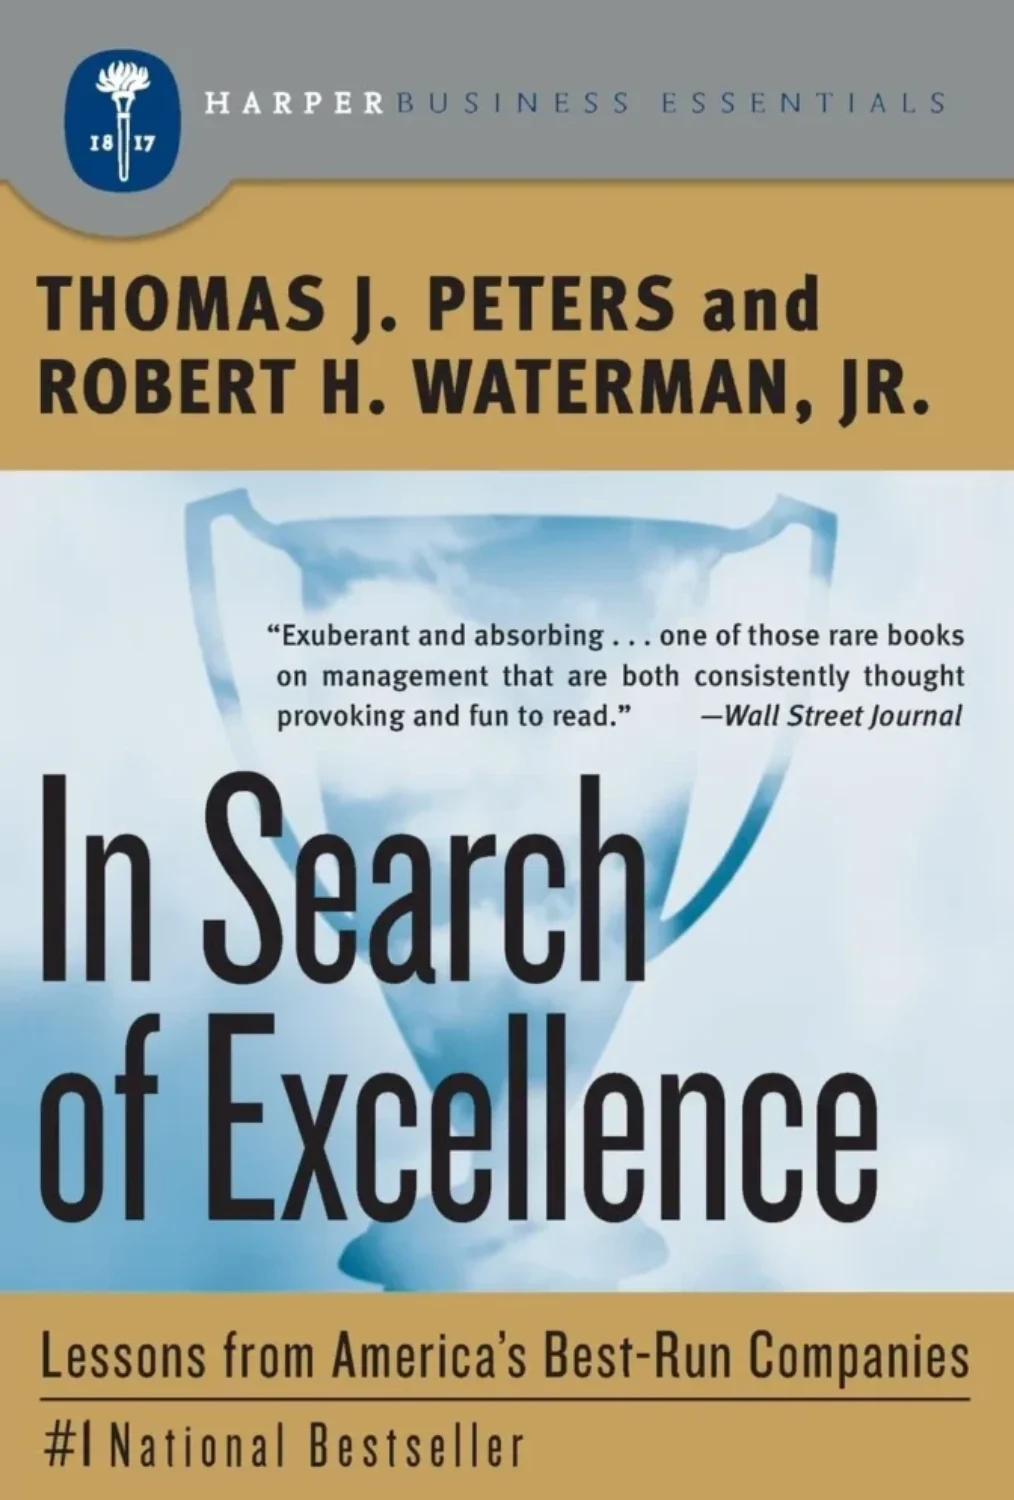 In Search of Excellence by Thomas J. Peters